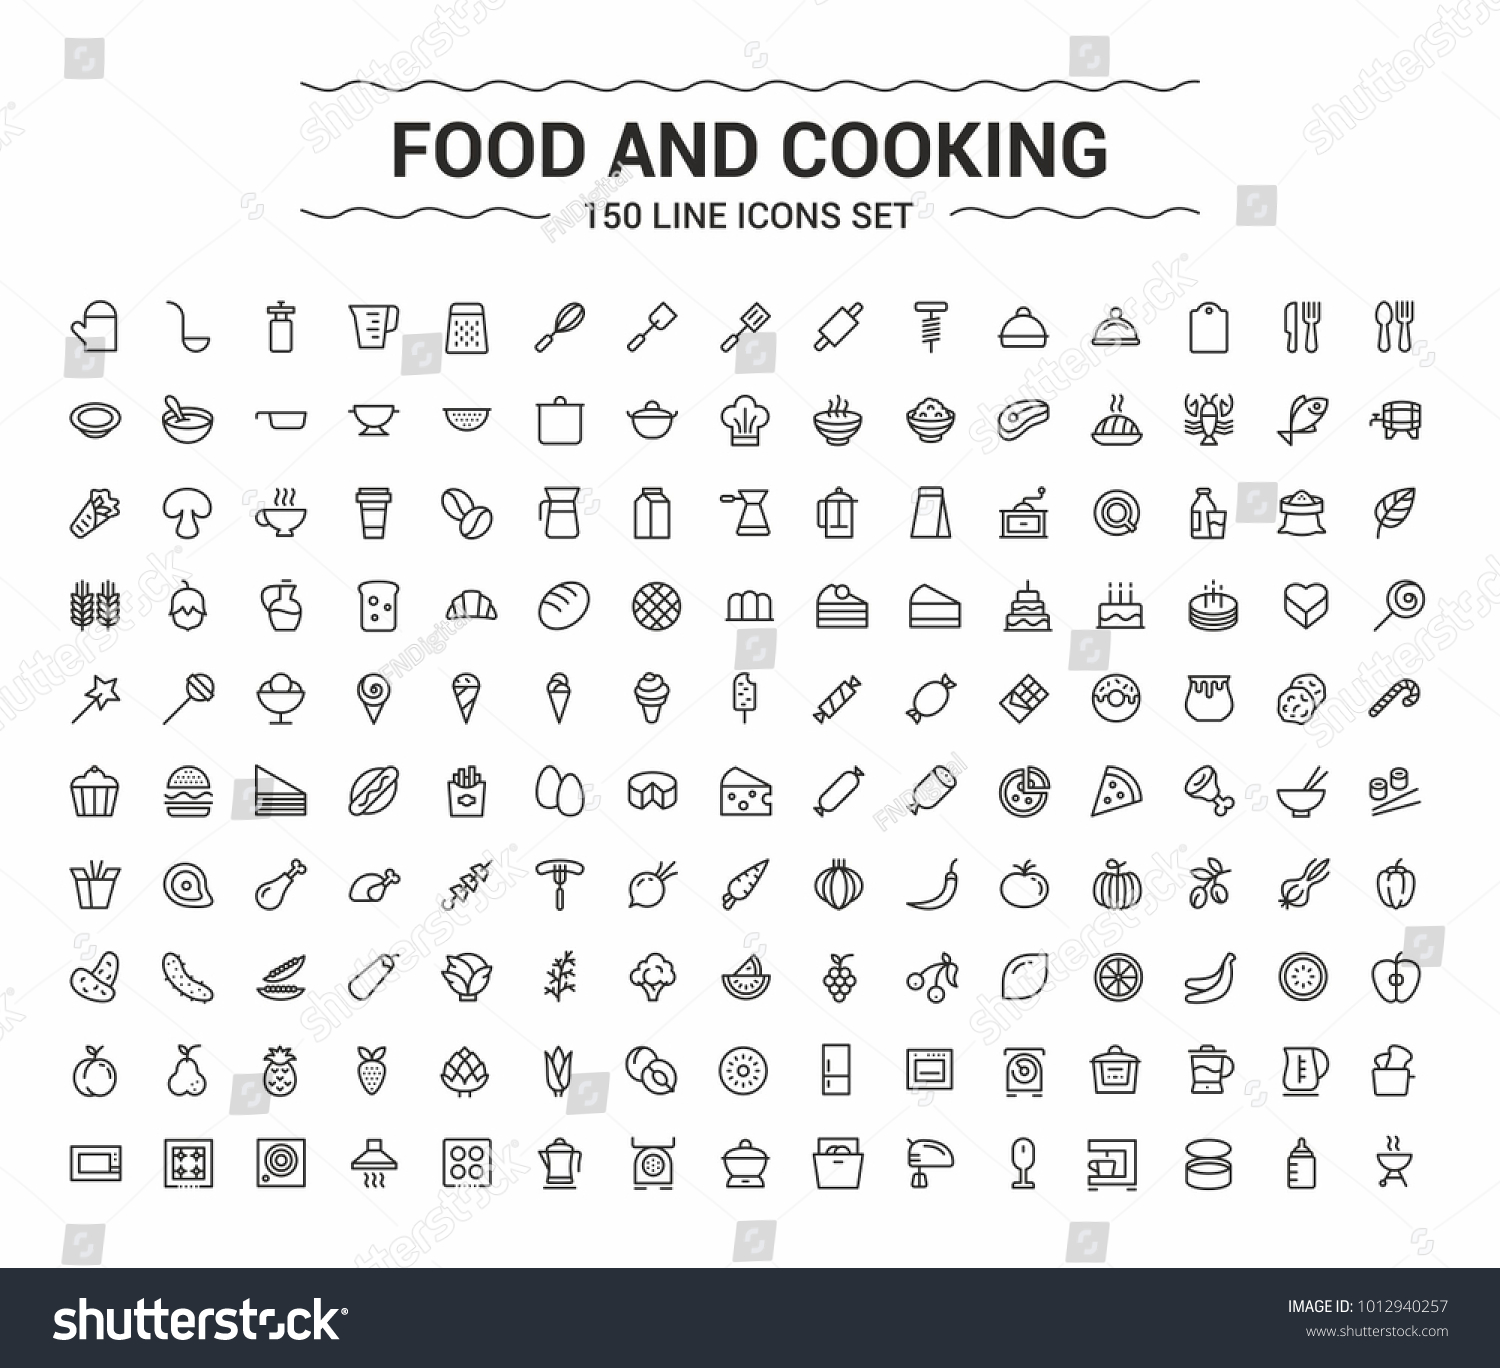 Food and Cooking. Minimalism vector symbols, line icons set for mobile and desktop screens design. #1012940257